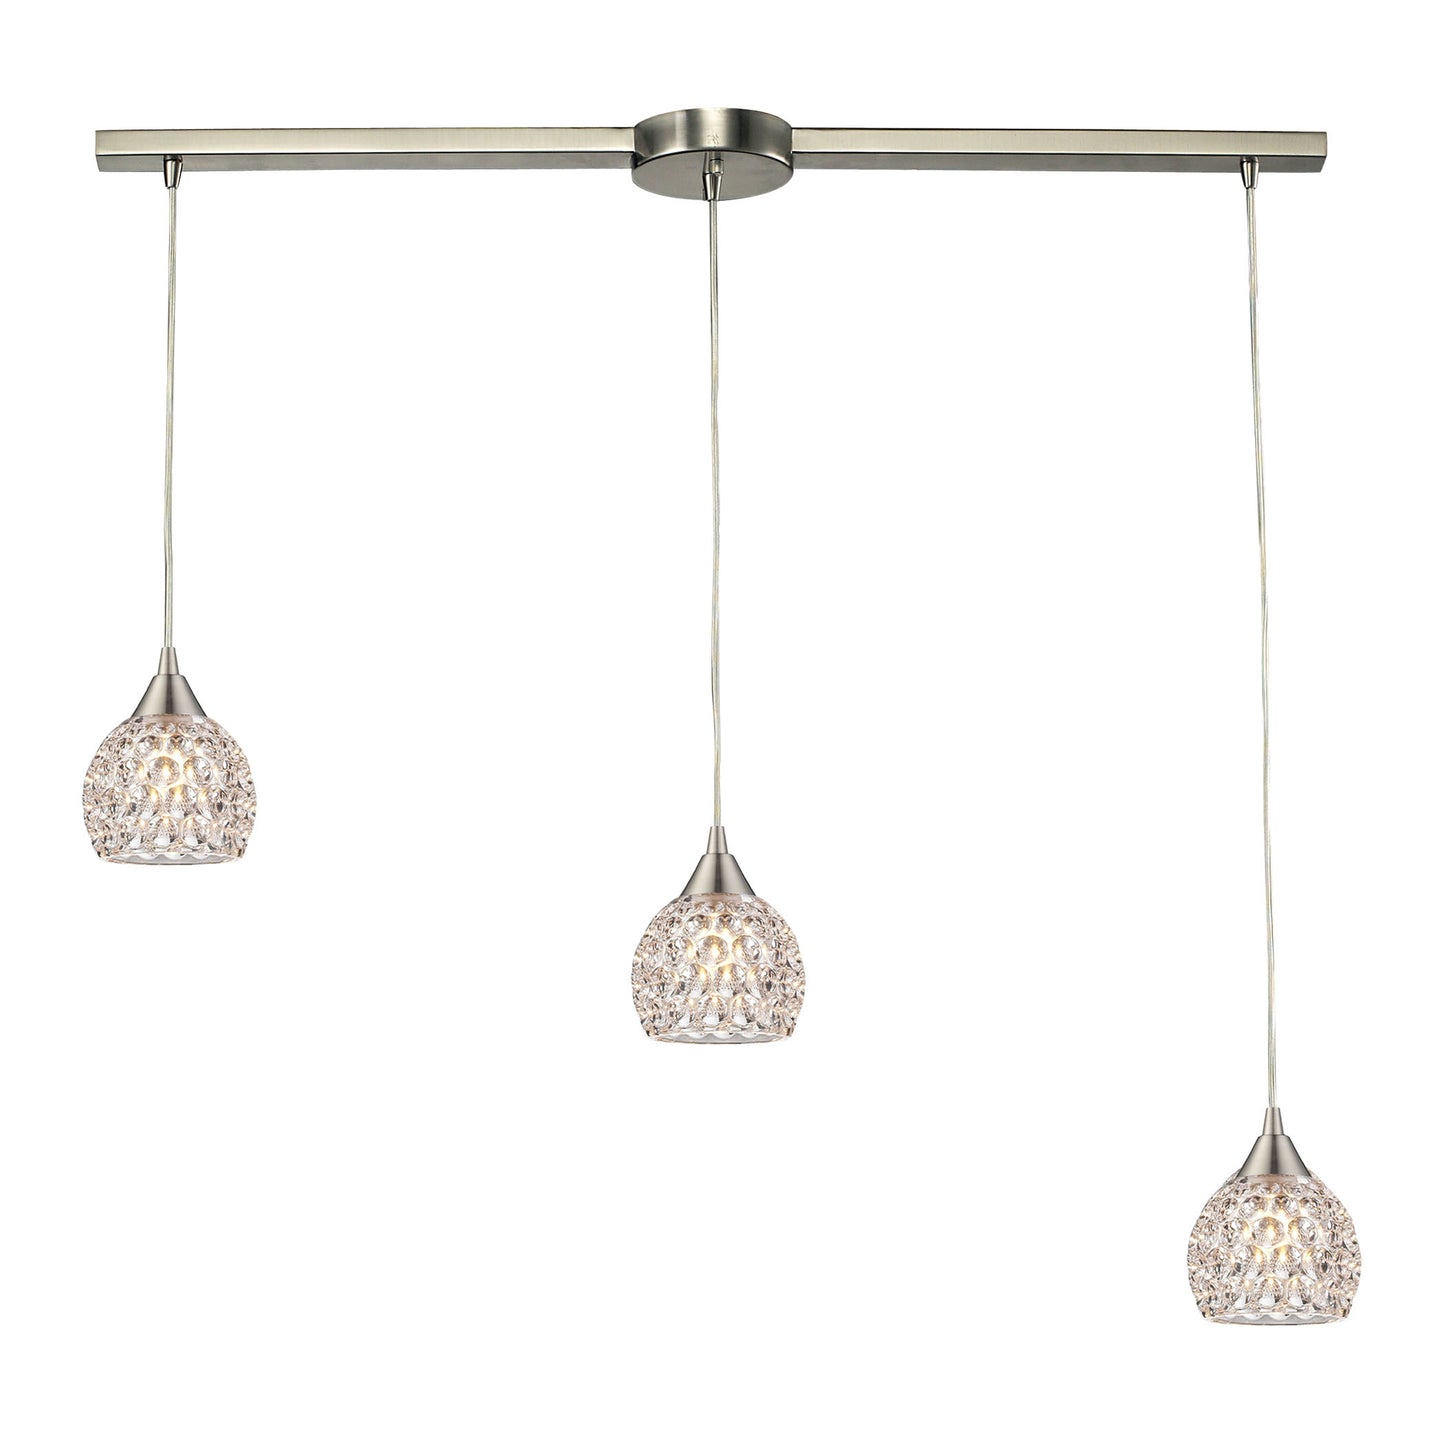 ELK Lighting 10341/3L - Kersey 5" Wide 3-Light Linear Pendant Fixture in Satin Nickel with Clear Cry